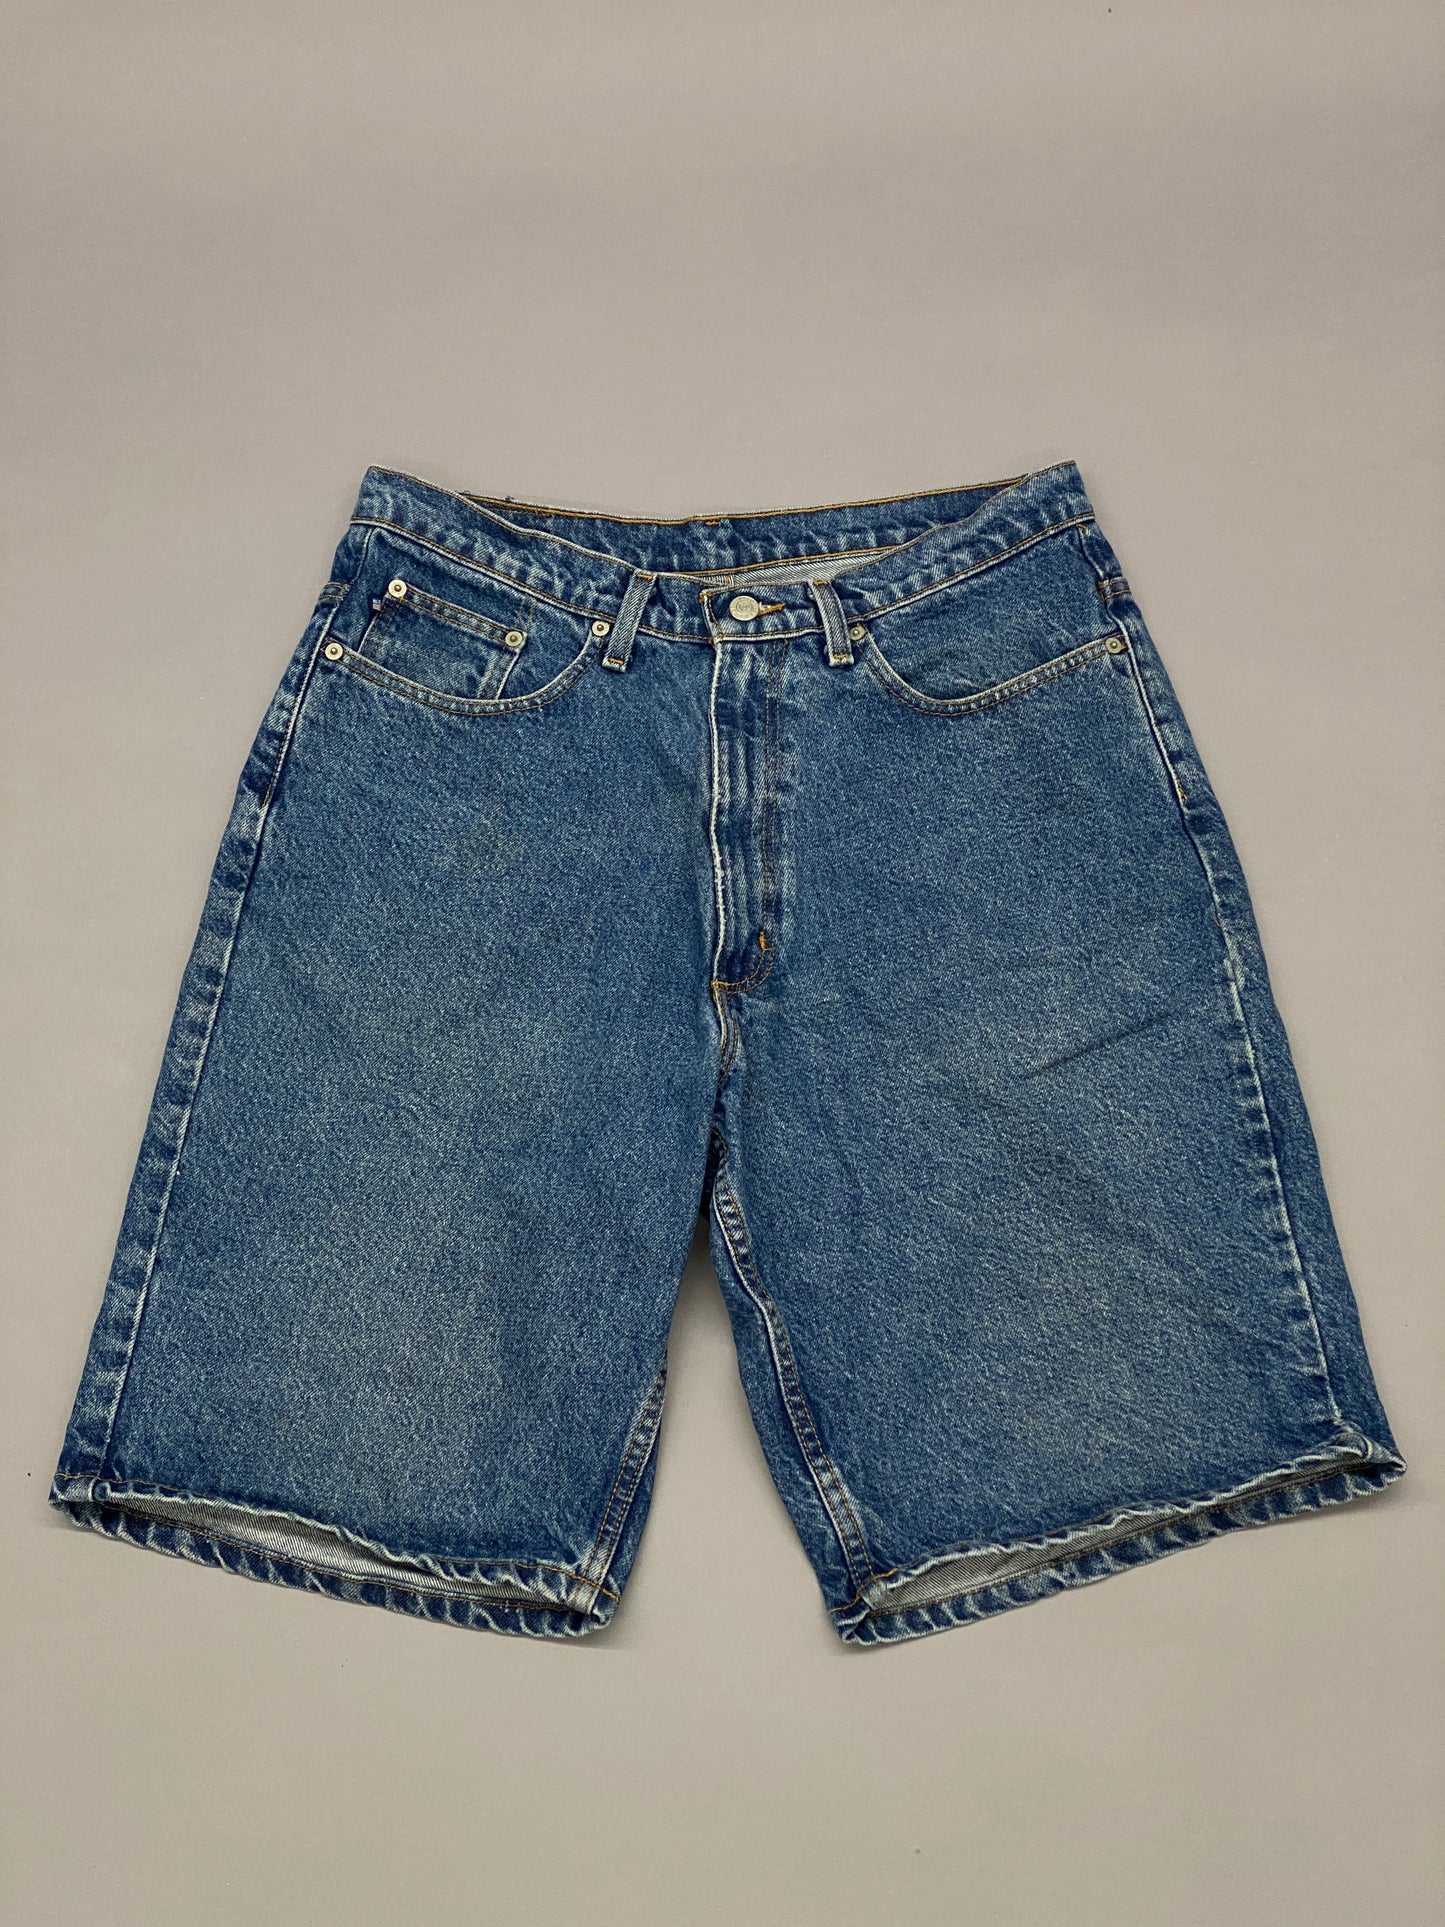 Polo Jeans Vintage Shorts - 32